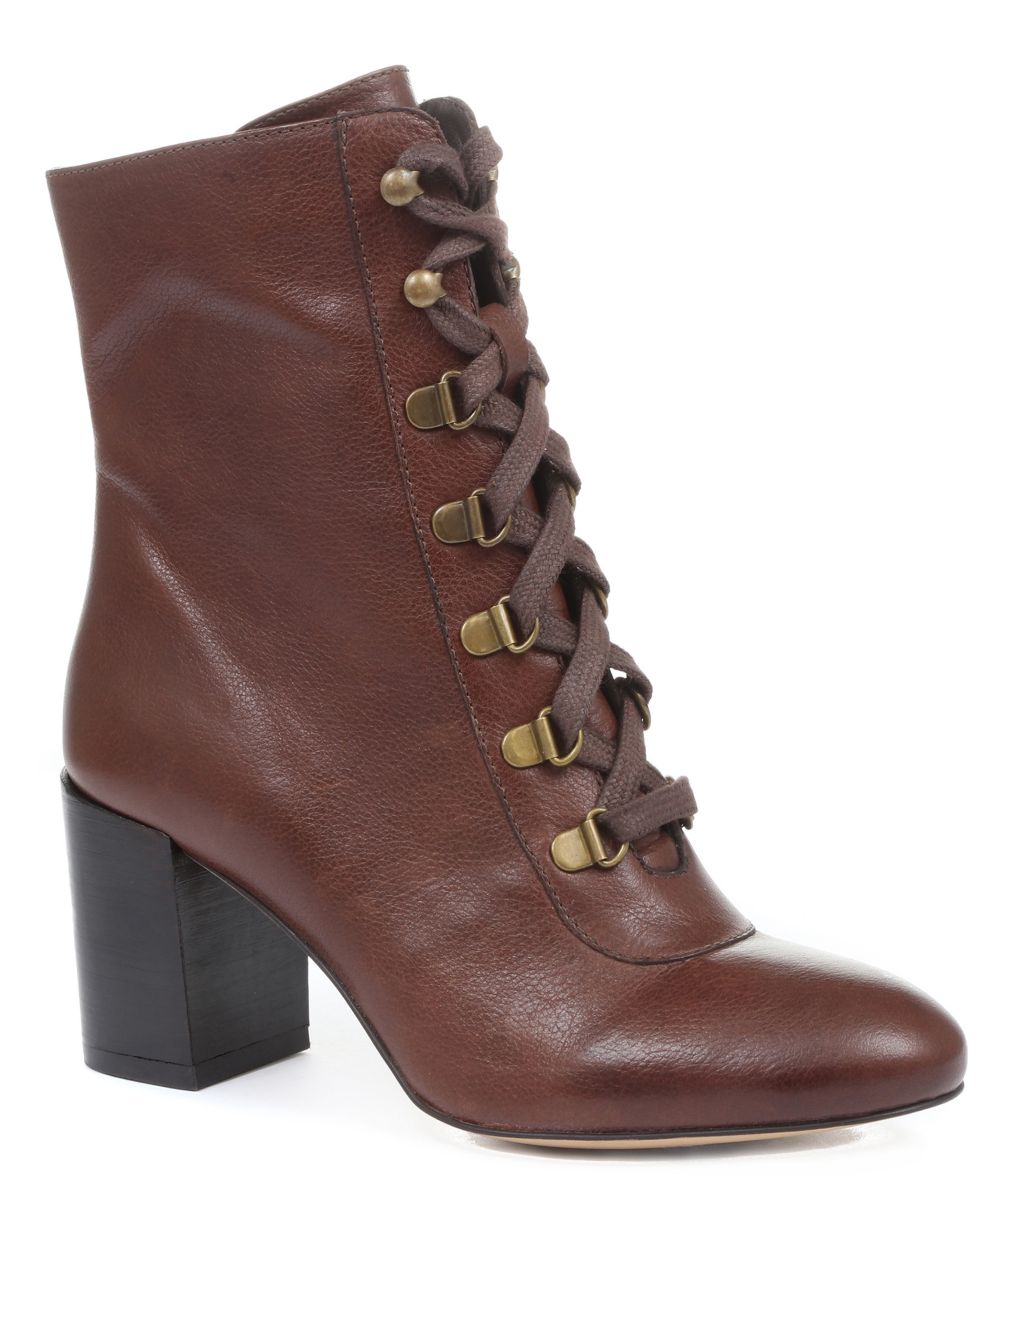 Leather Lace-Up Block Heel Ankle Boots image 2